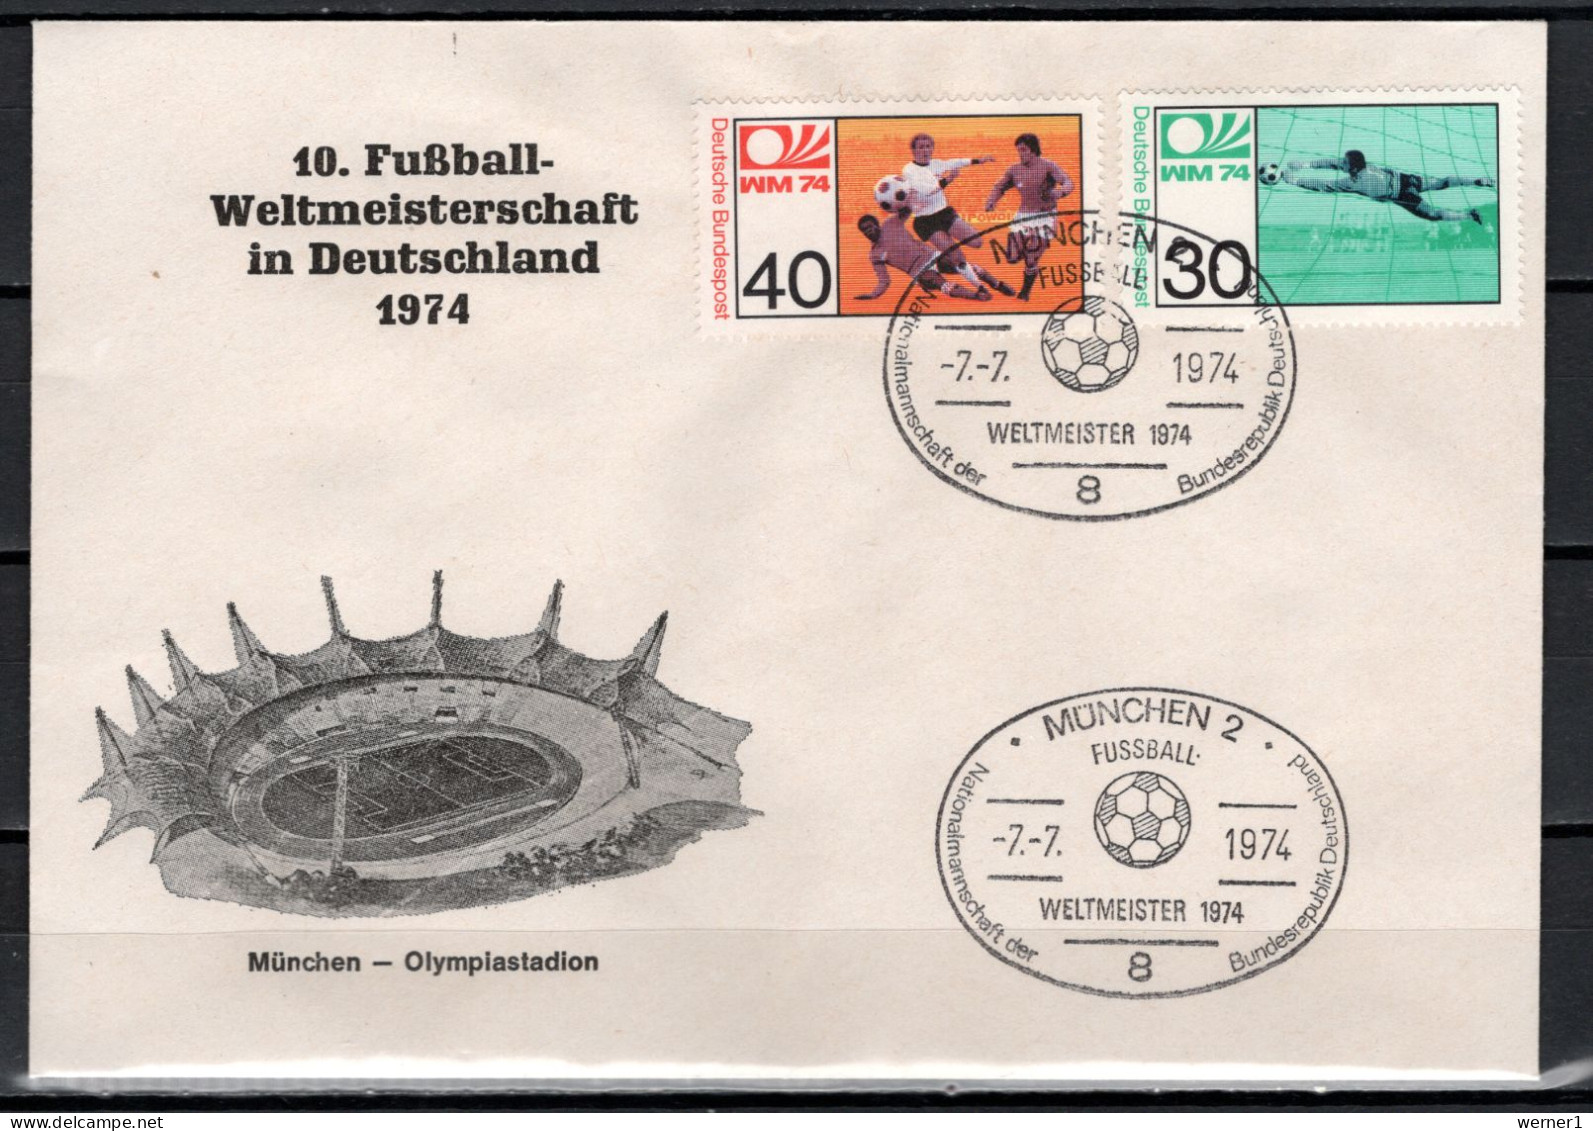 Germany 1974 Football Soccer World Cup Commemorative Cover, Germany World Cup Champion - 1974 – West Germany